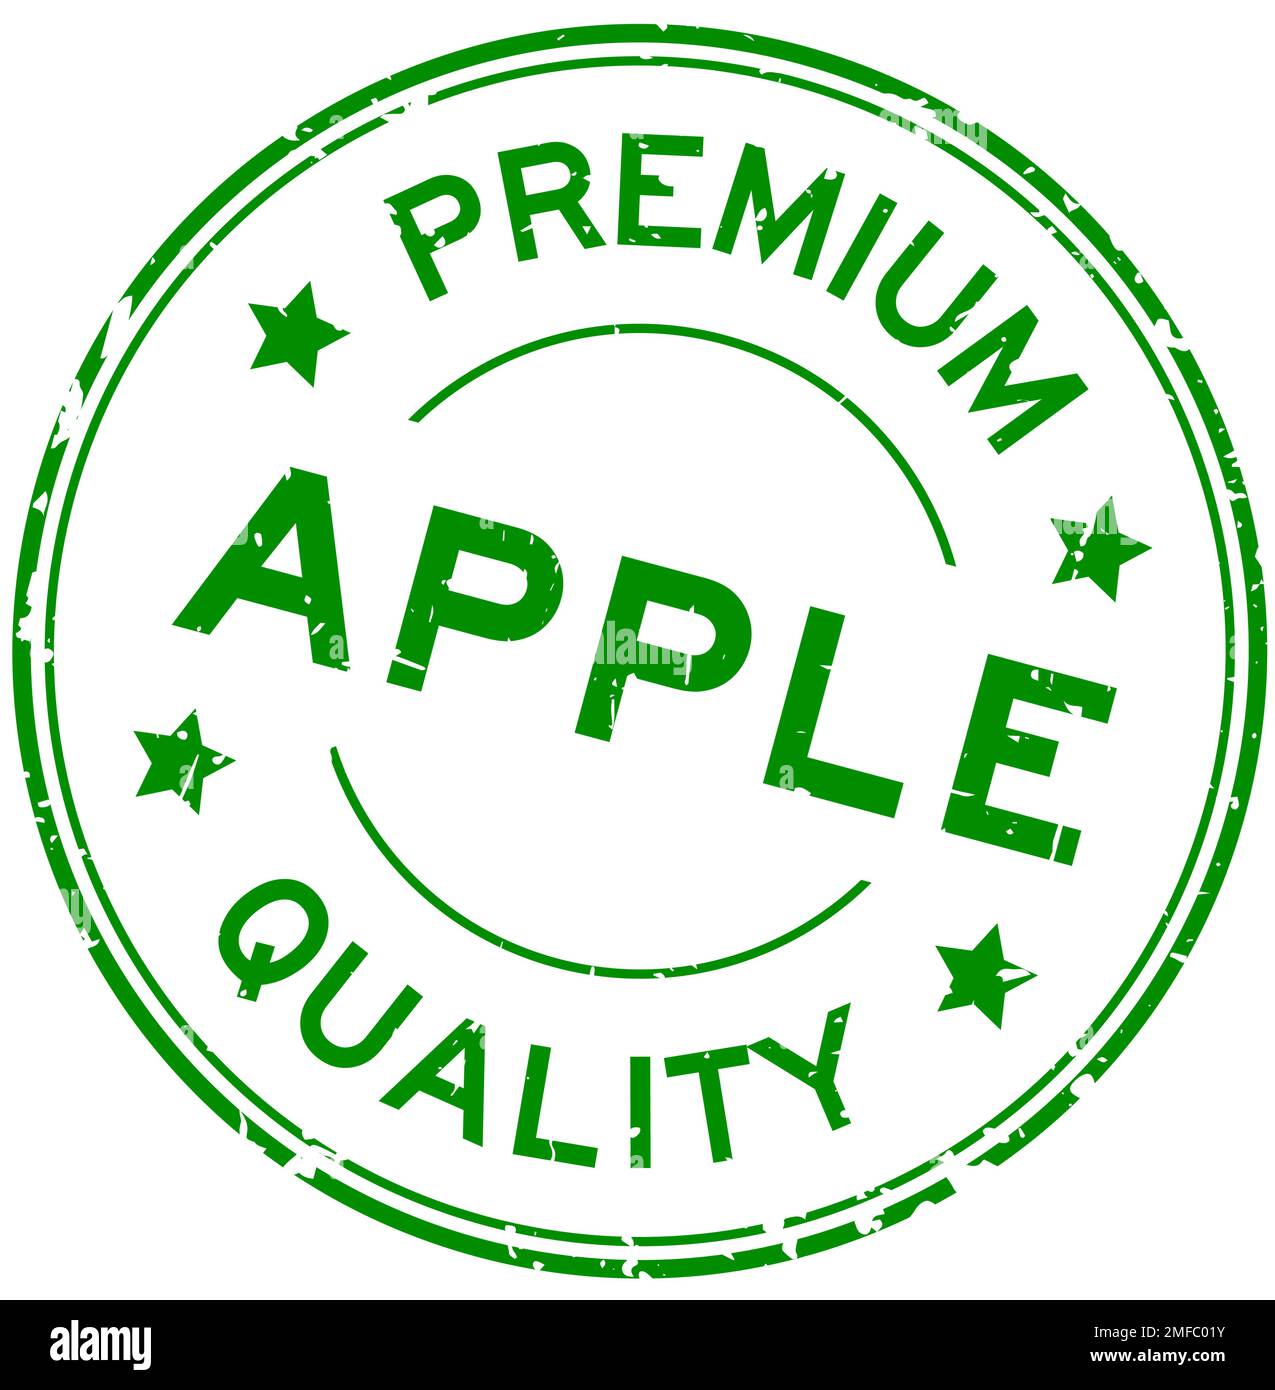 Grunge green premium quality apple word round rubber seal stamp on white background Stock Vector